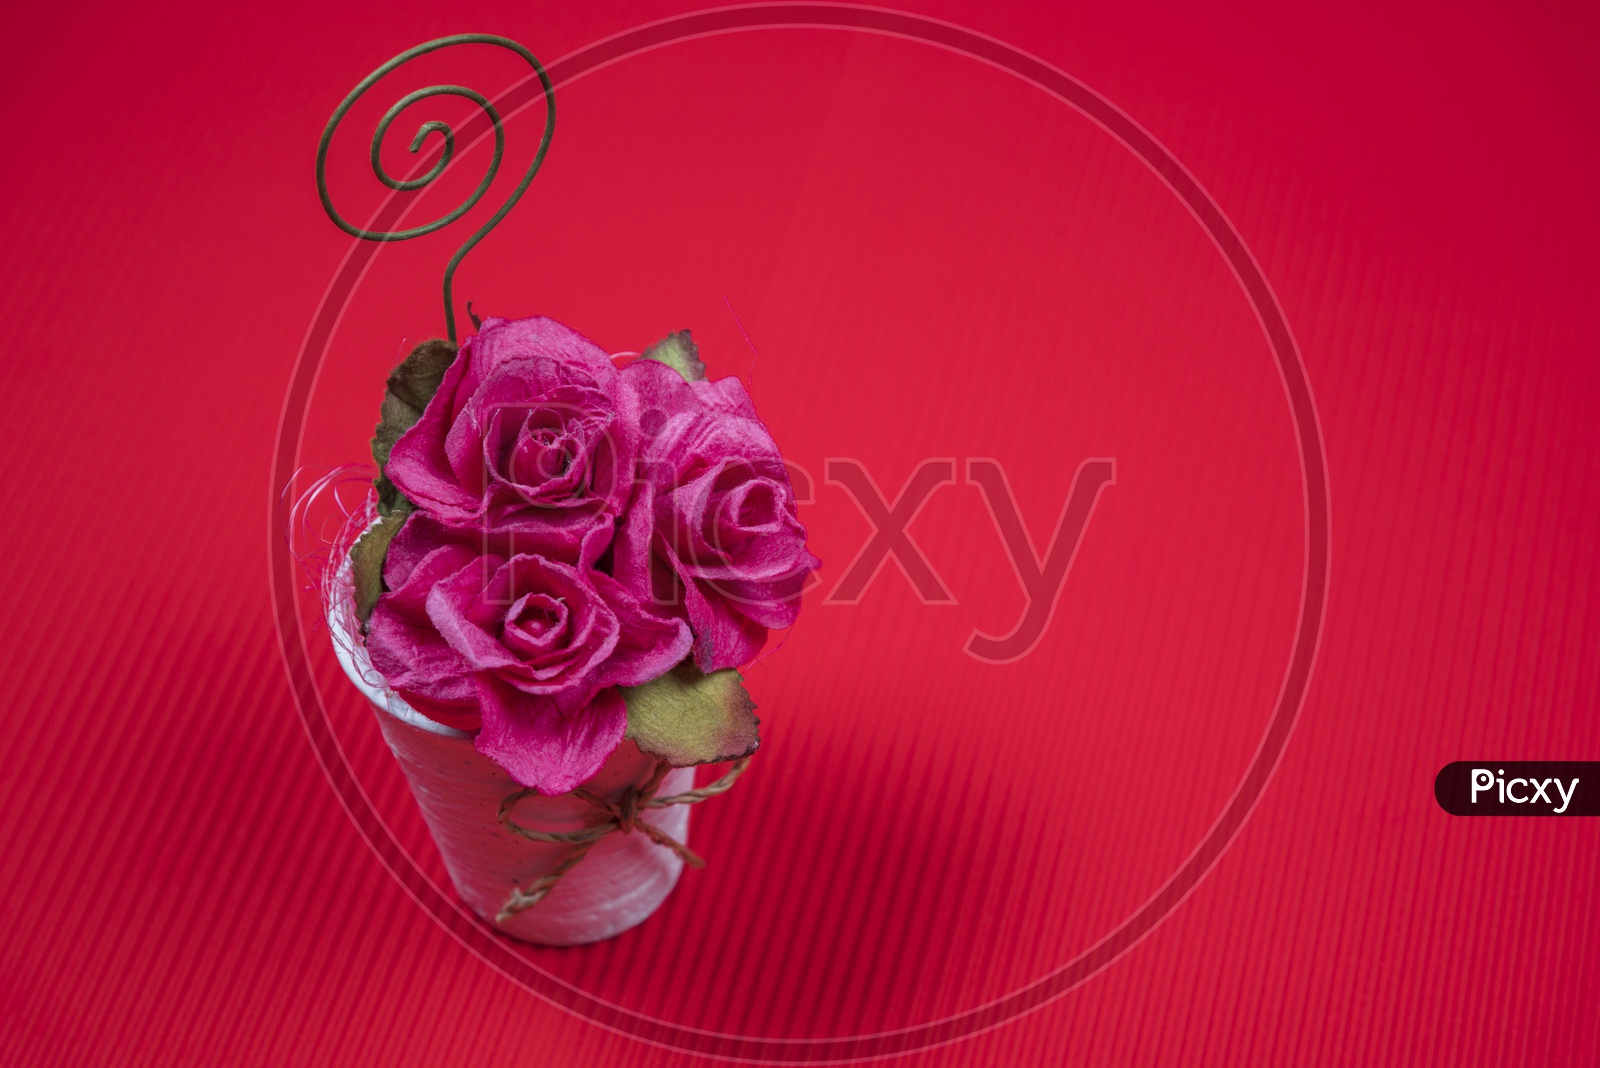 Rose Flowers Vase On an Red Isolated Background With Space